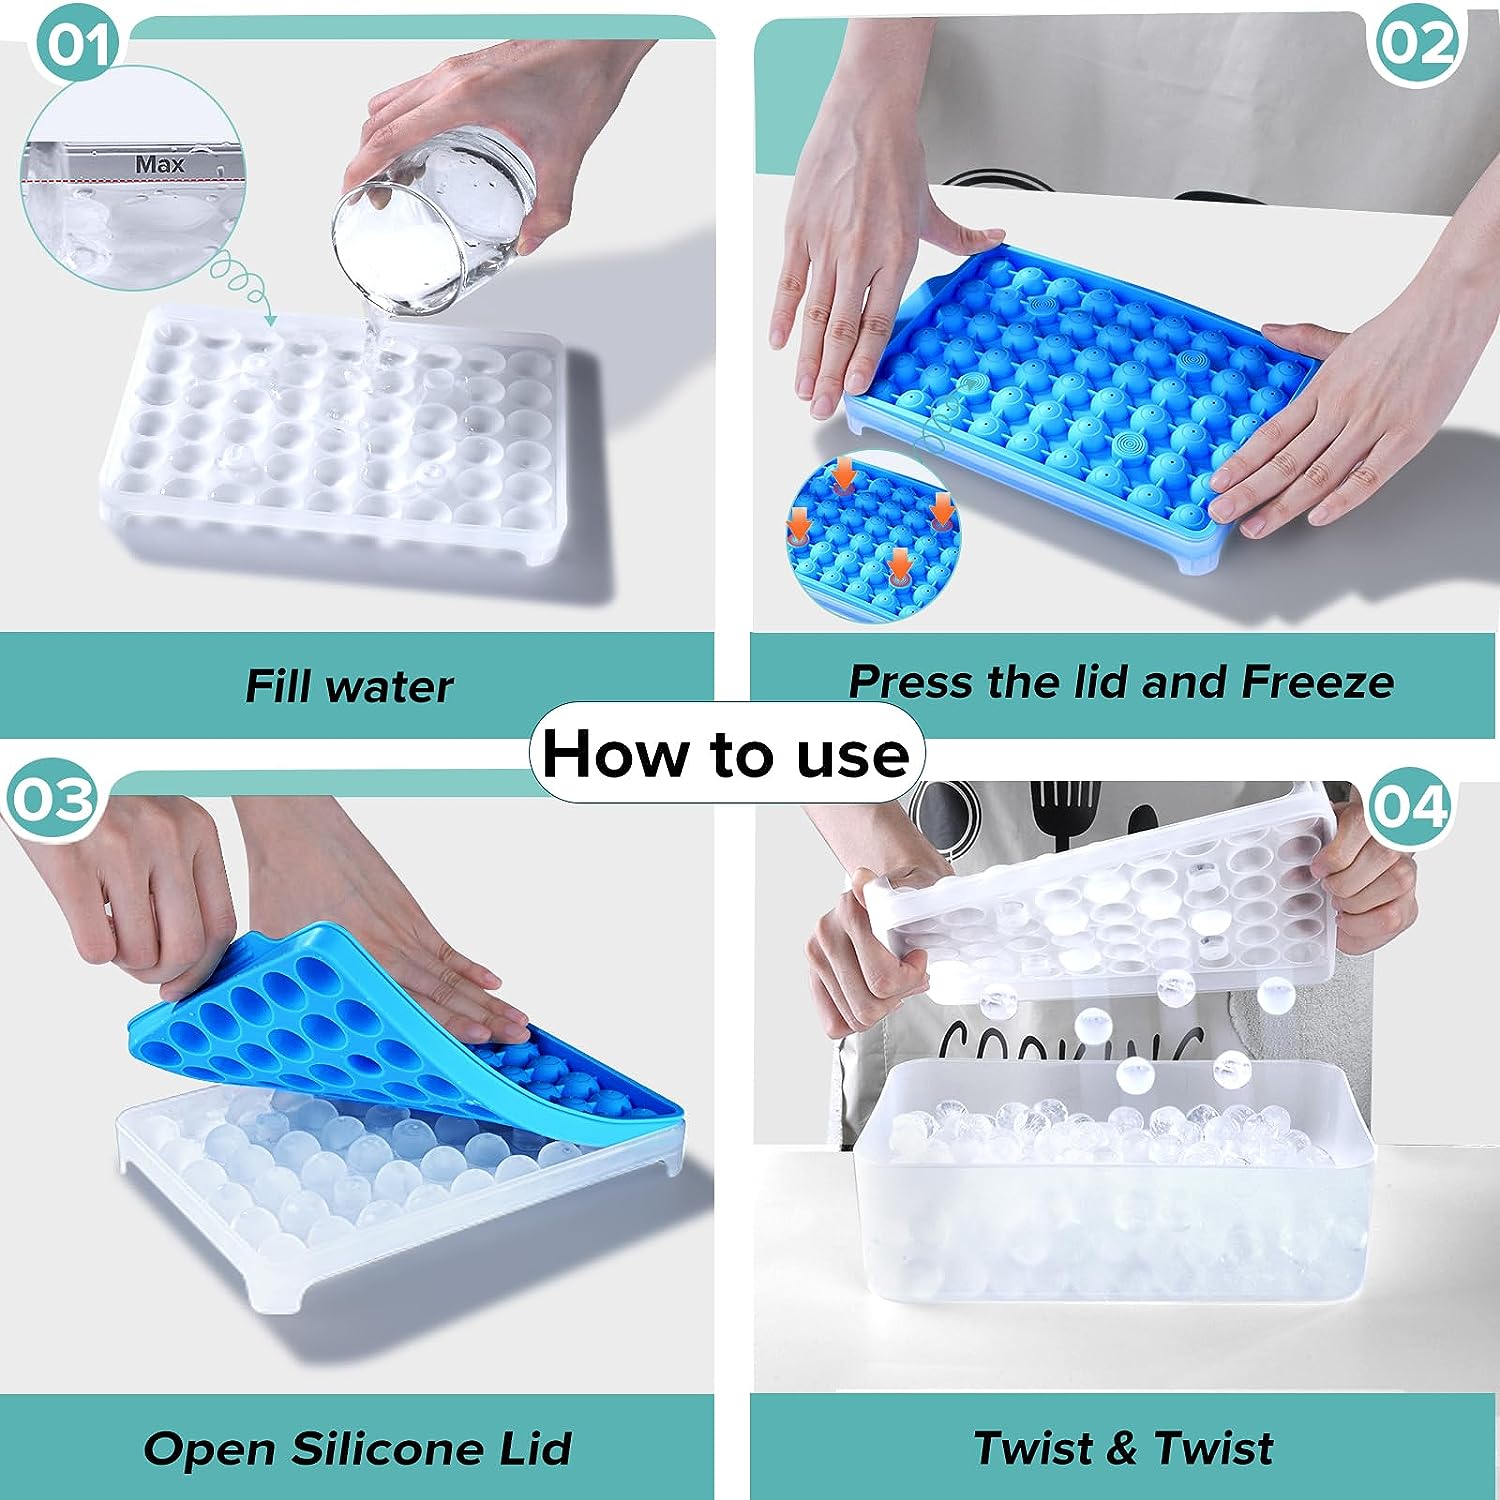 longzon Mini Round Ice Cube Tray with Lid and Bin, 2 pack Silicone Ice Cube Trays for Freezer